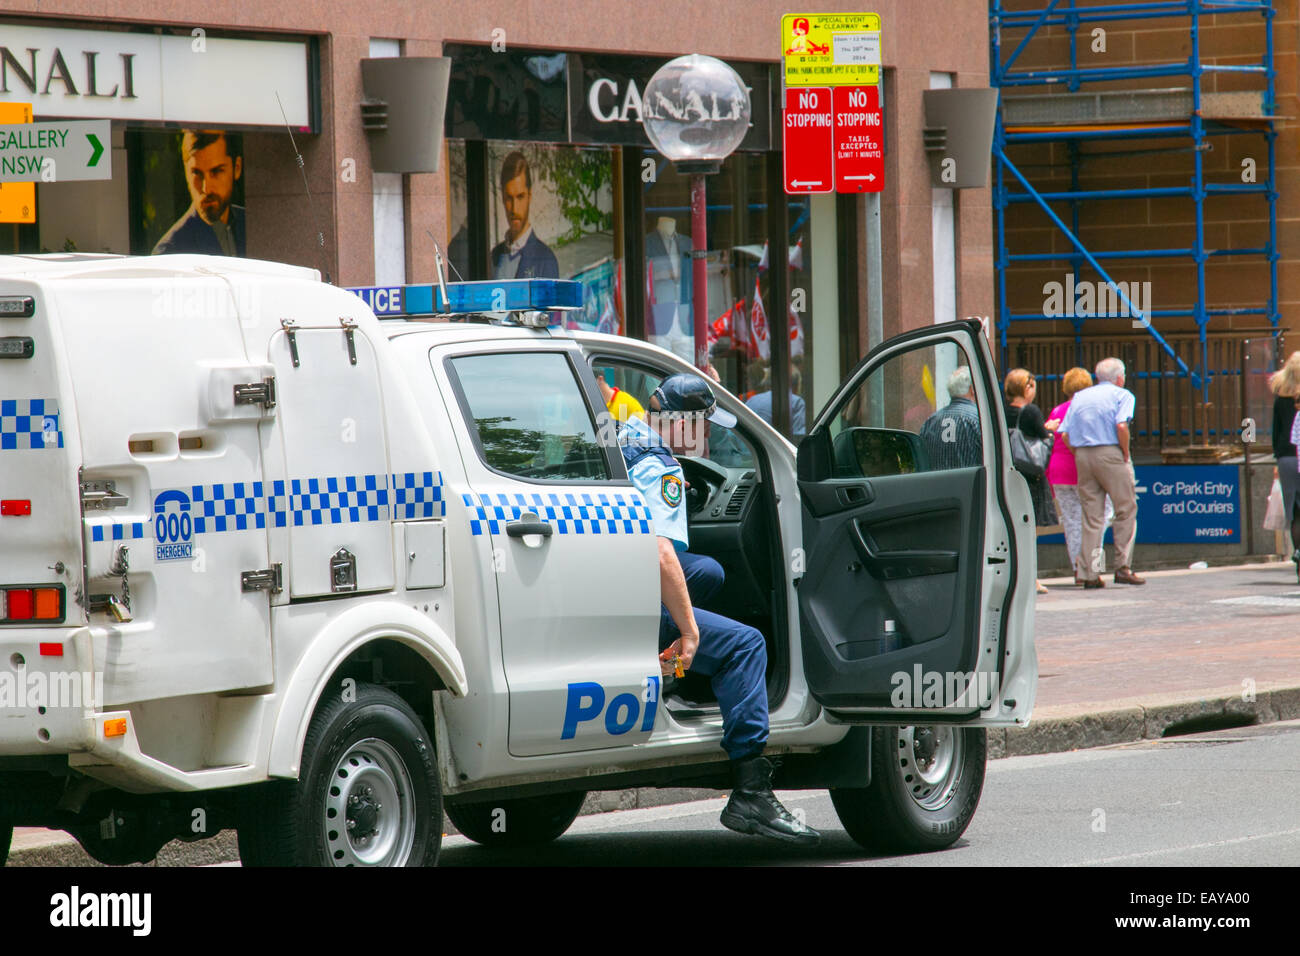 Australian new south wales police officer exits his police car in macquarie street,Sydney,australia Stock Photo